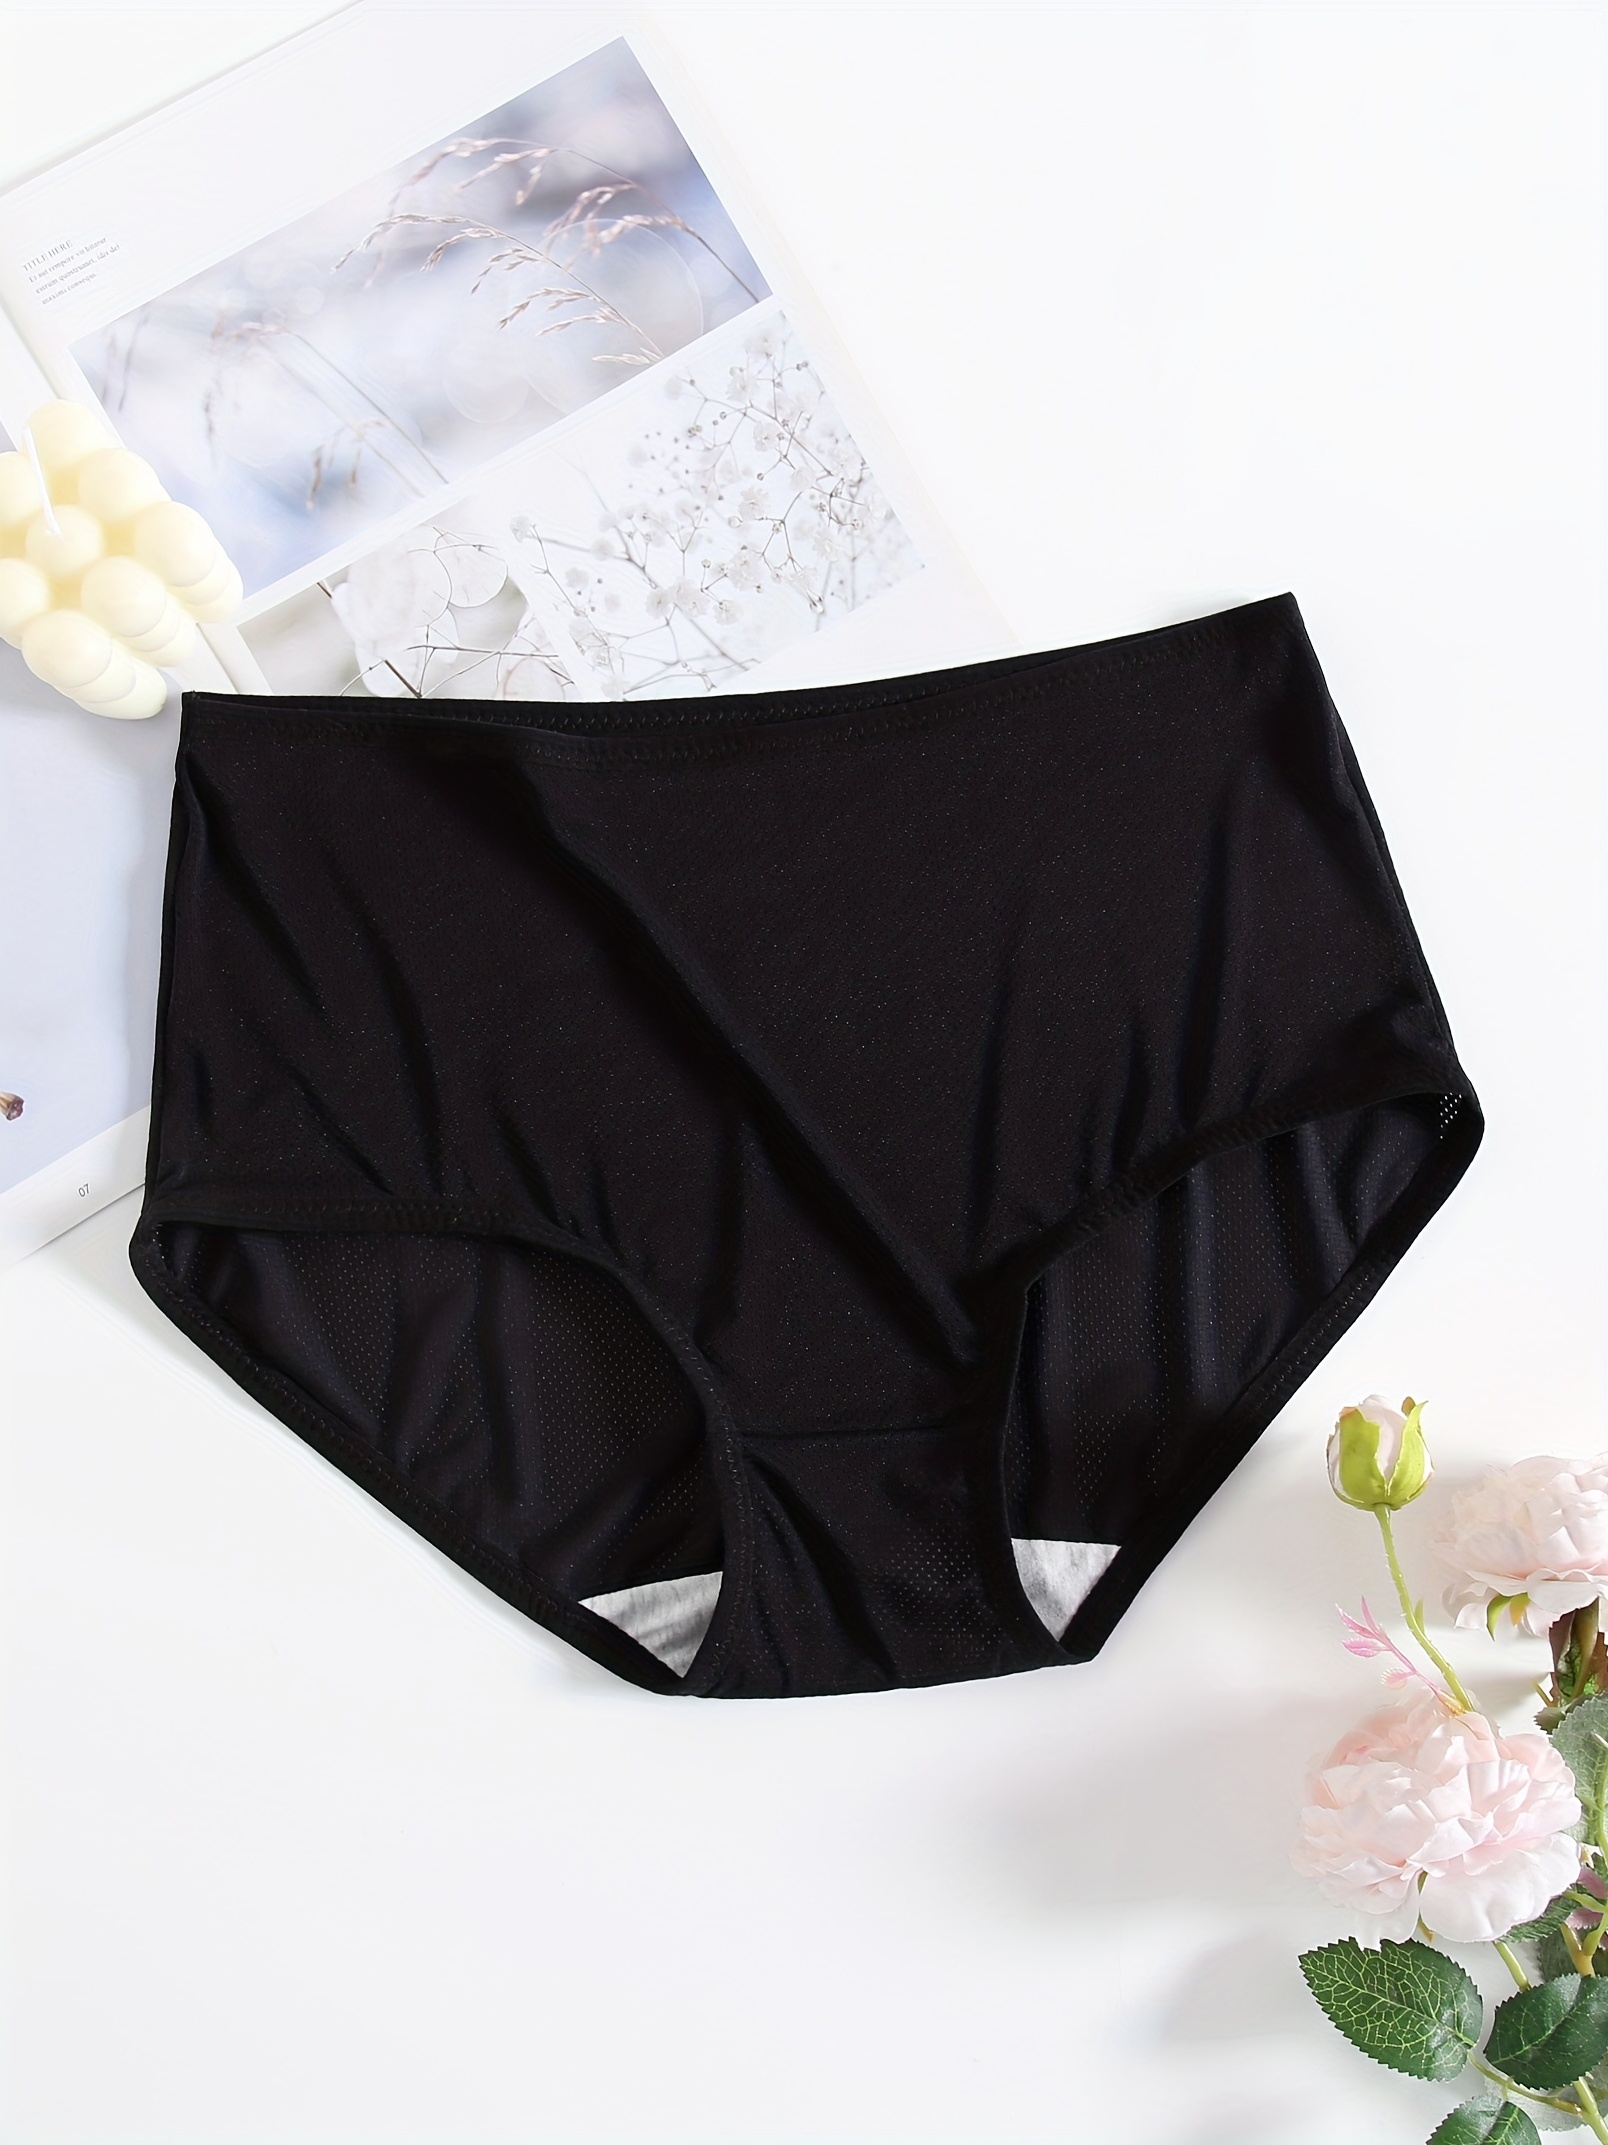 Women Plus Size Stretchy Seamless Solid Color Middle Waist Underwear Panties